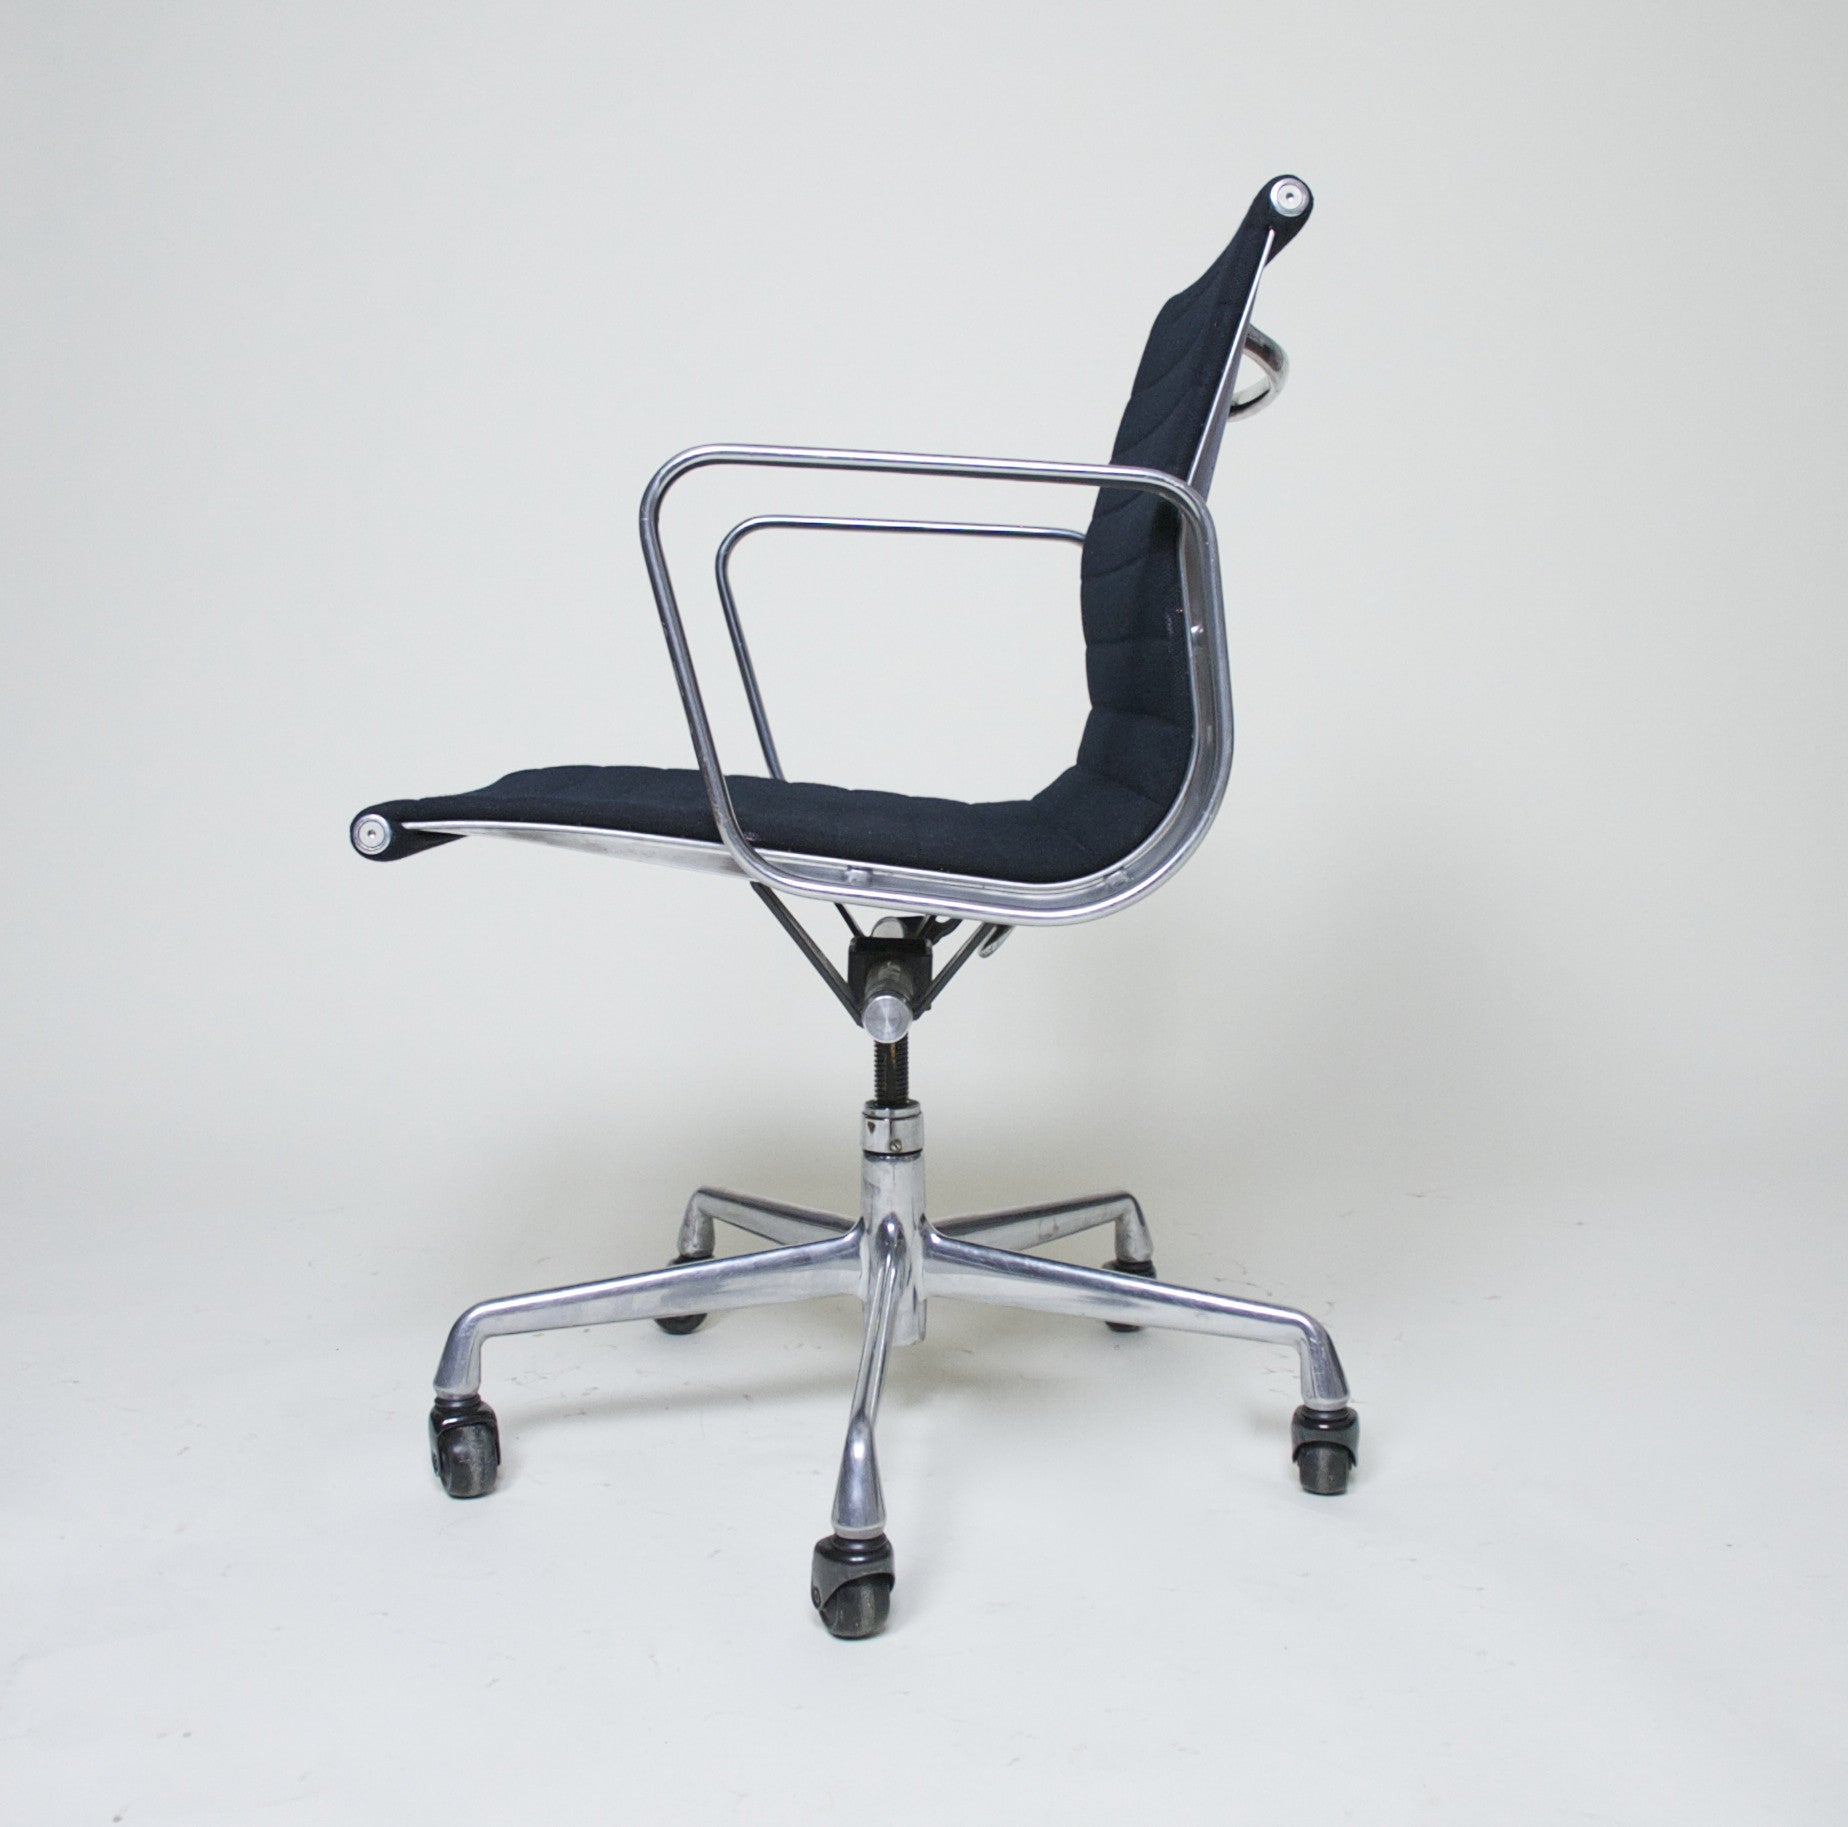 SOLD Herman Miller Eames Aluminum Group Executive Chair in Black, 4 Available, Mint